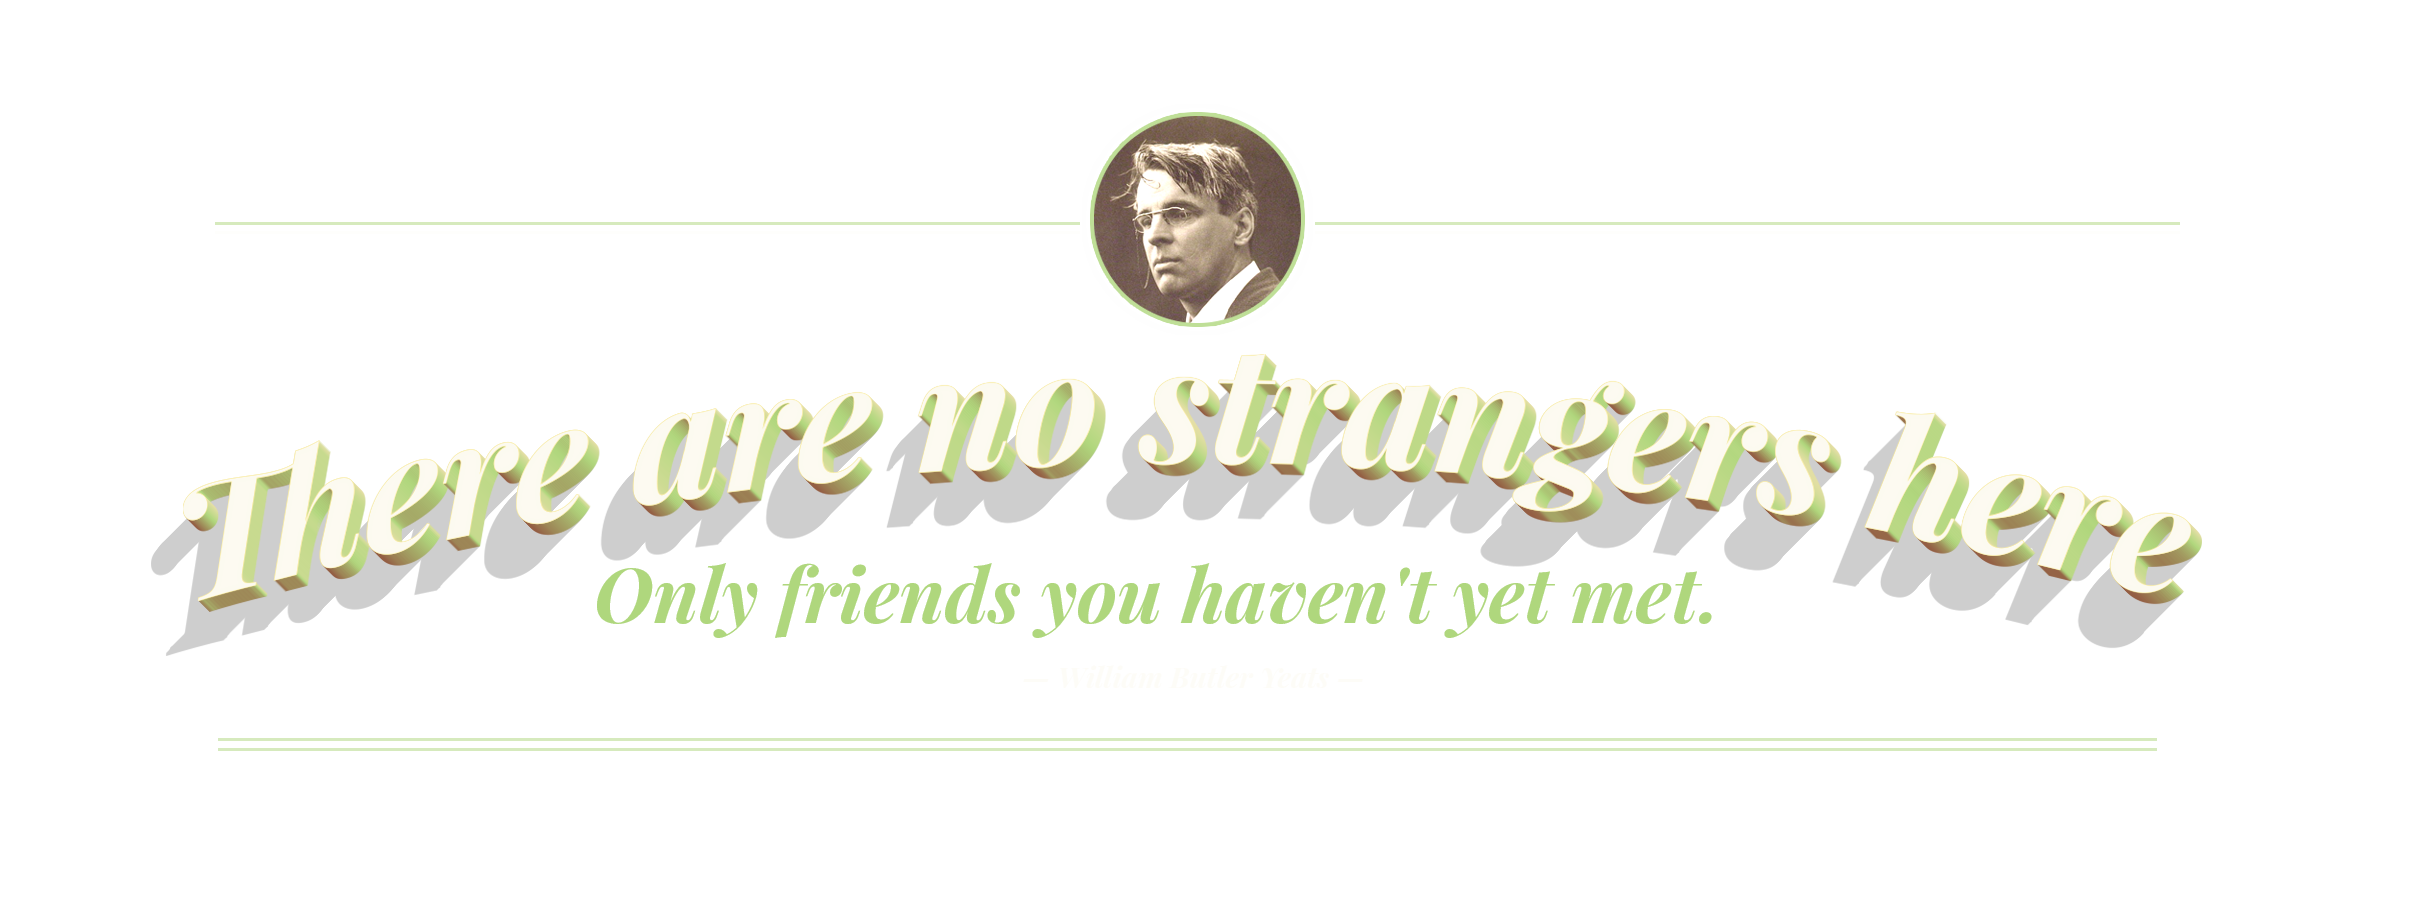 There are no strangers here